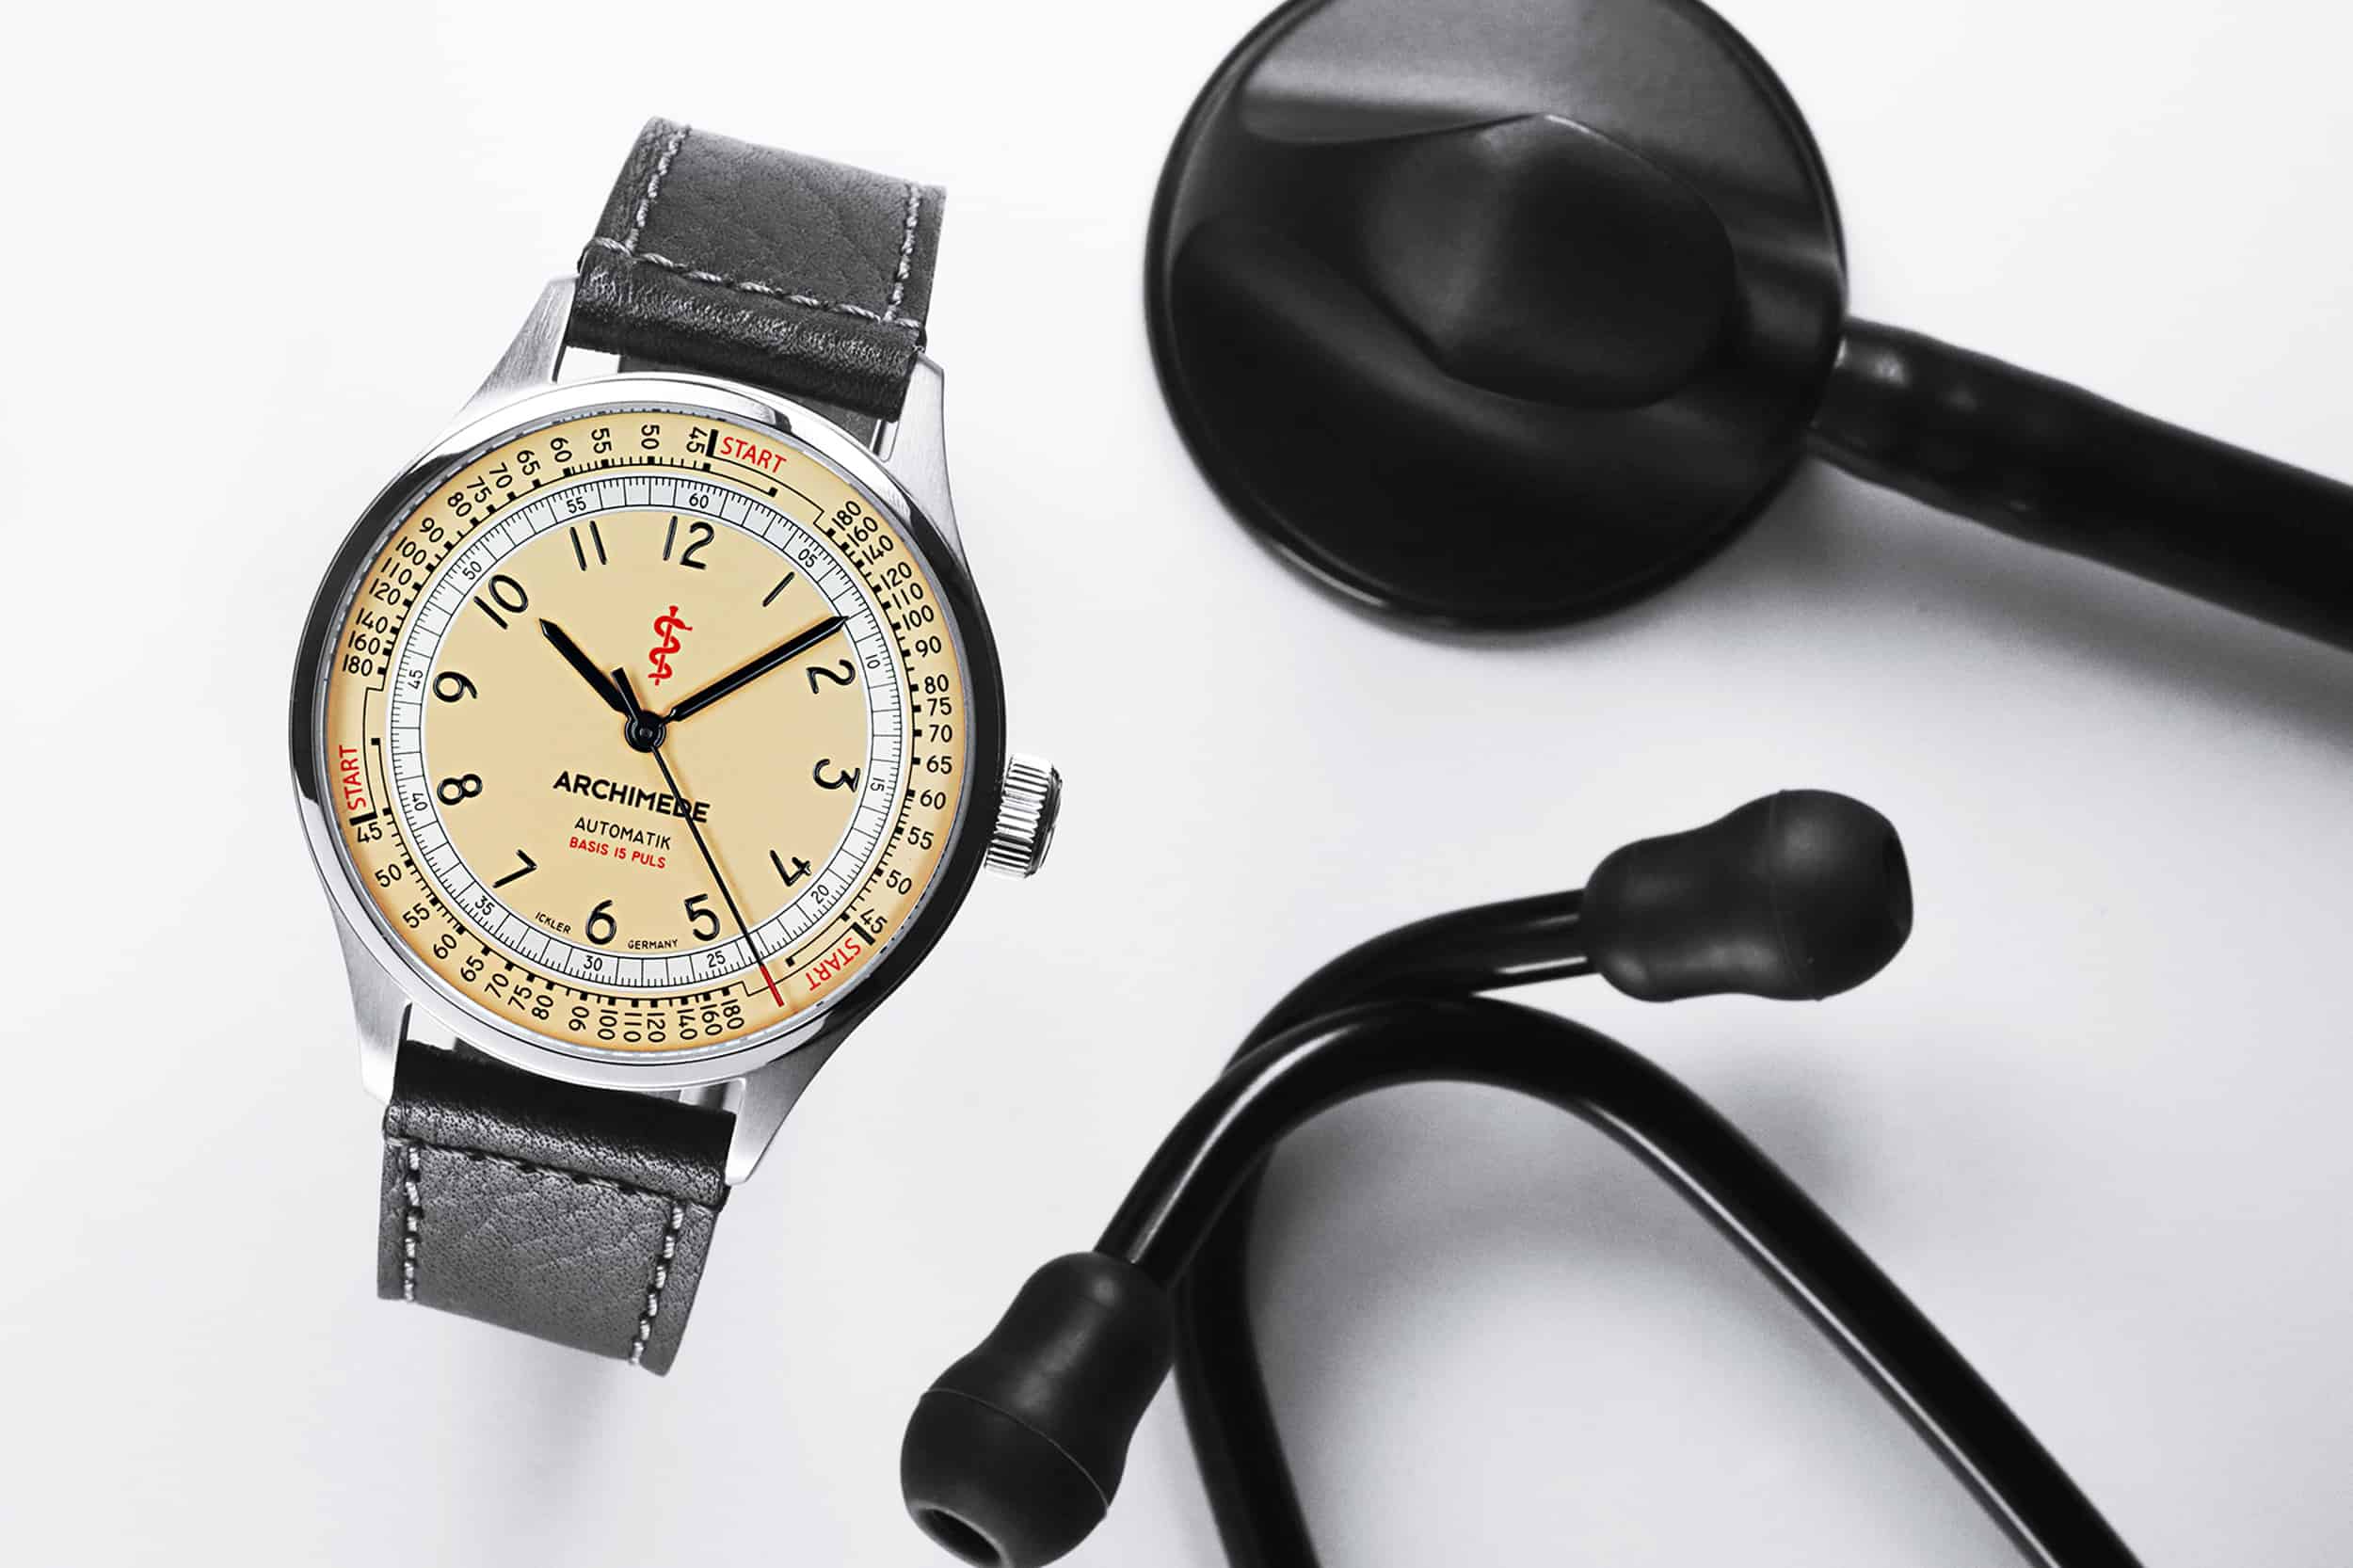 Introducing the Archimede Doctor's Watch - Worn & Wound